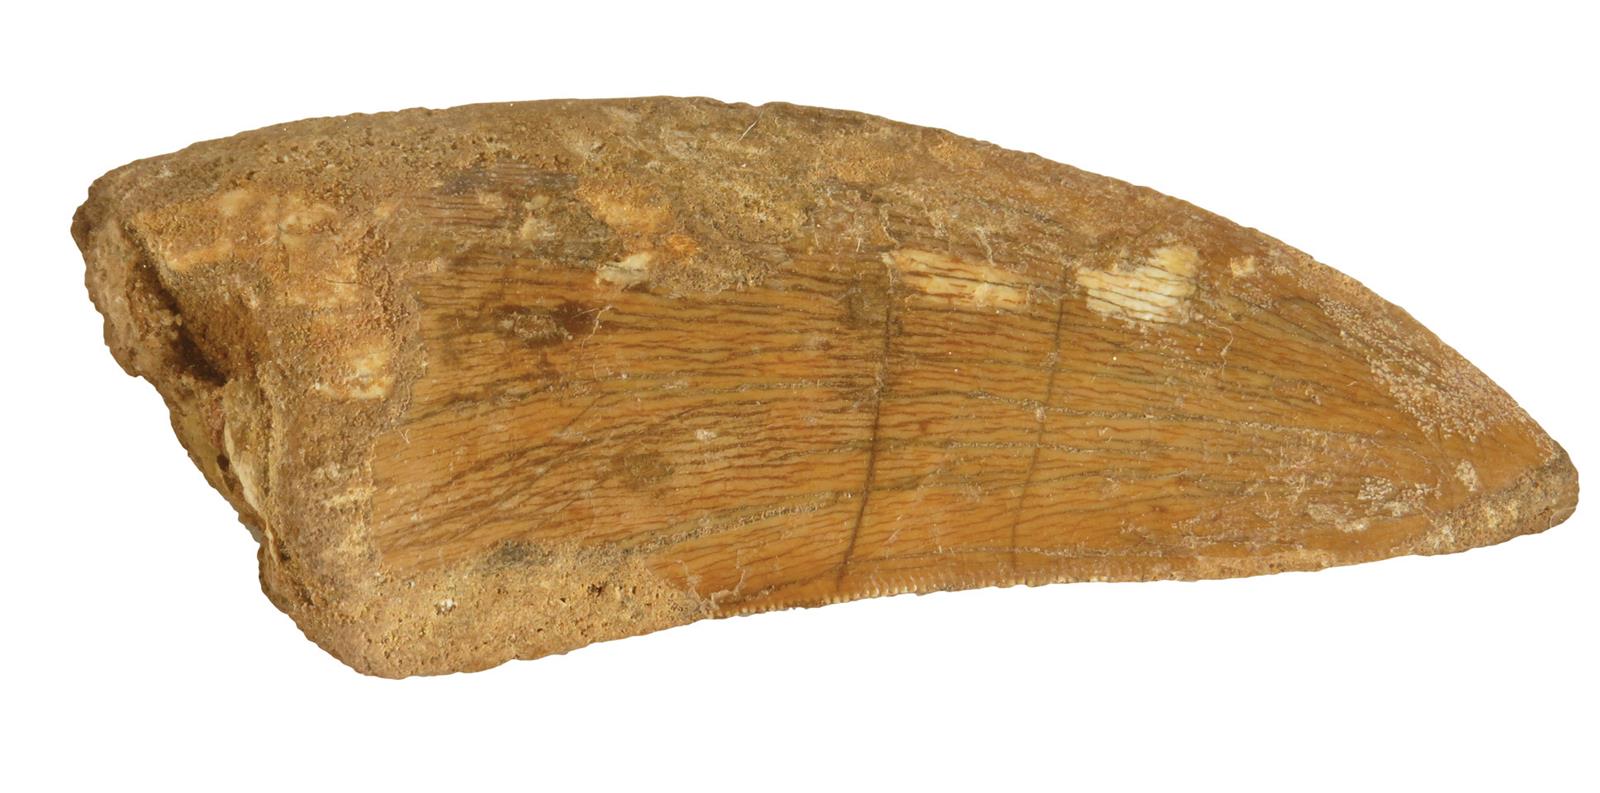 A fossilized Carcharodontosaurus saharicus tooth, from a Theropod dinosaur, c.100-93 million years